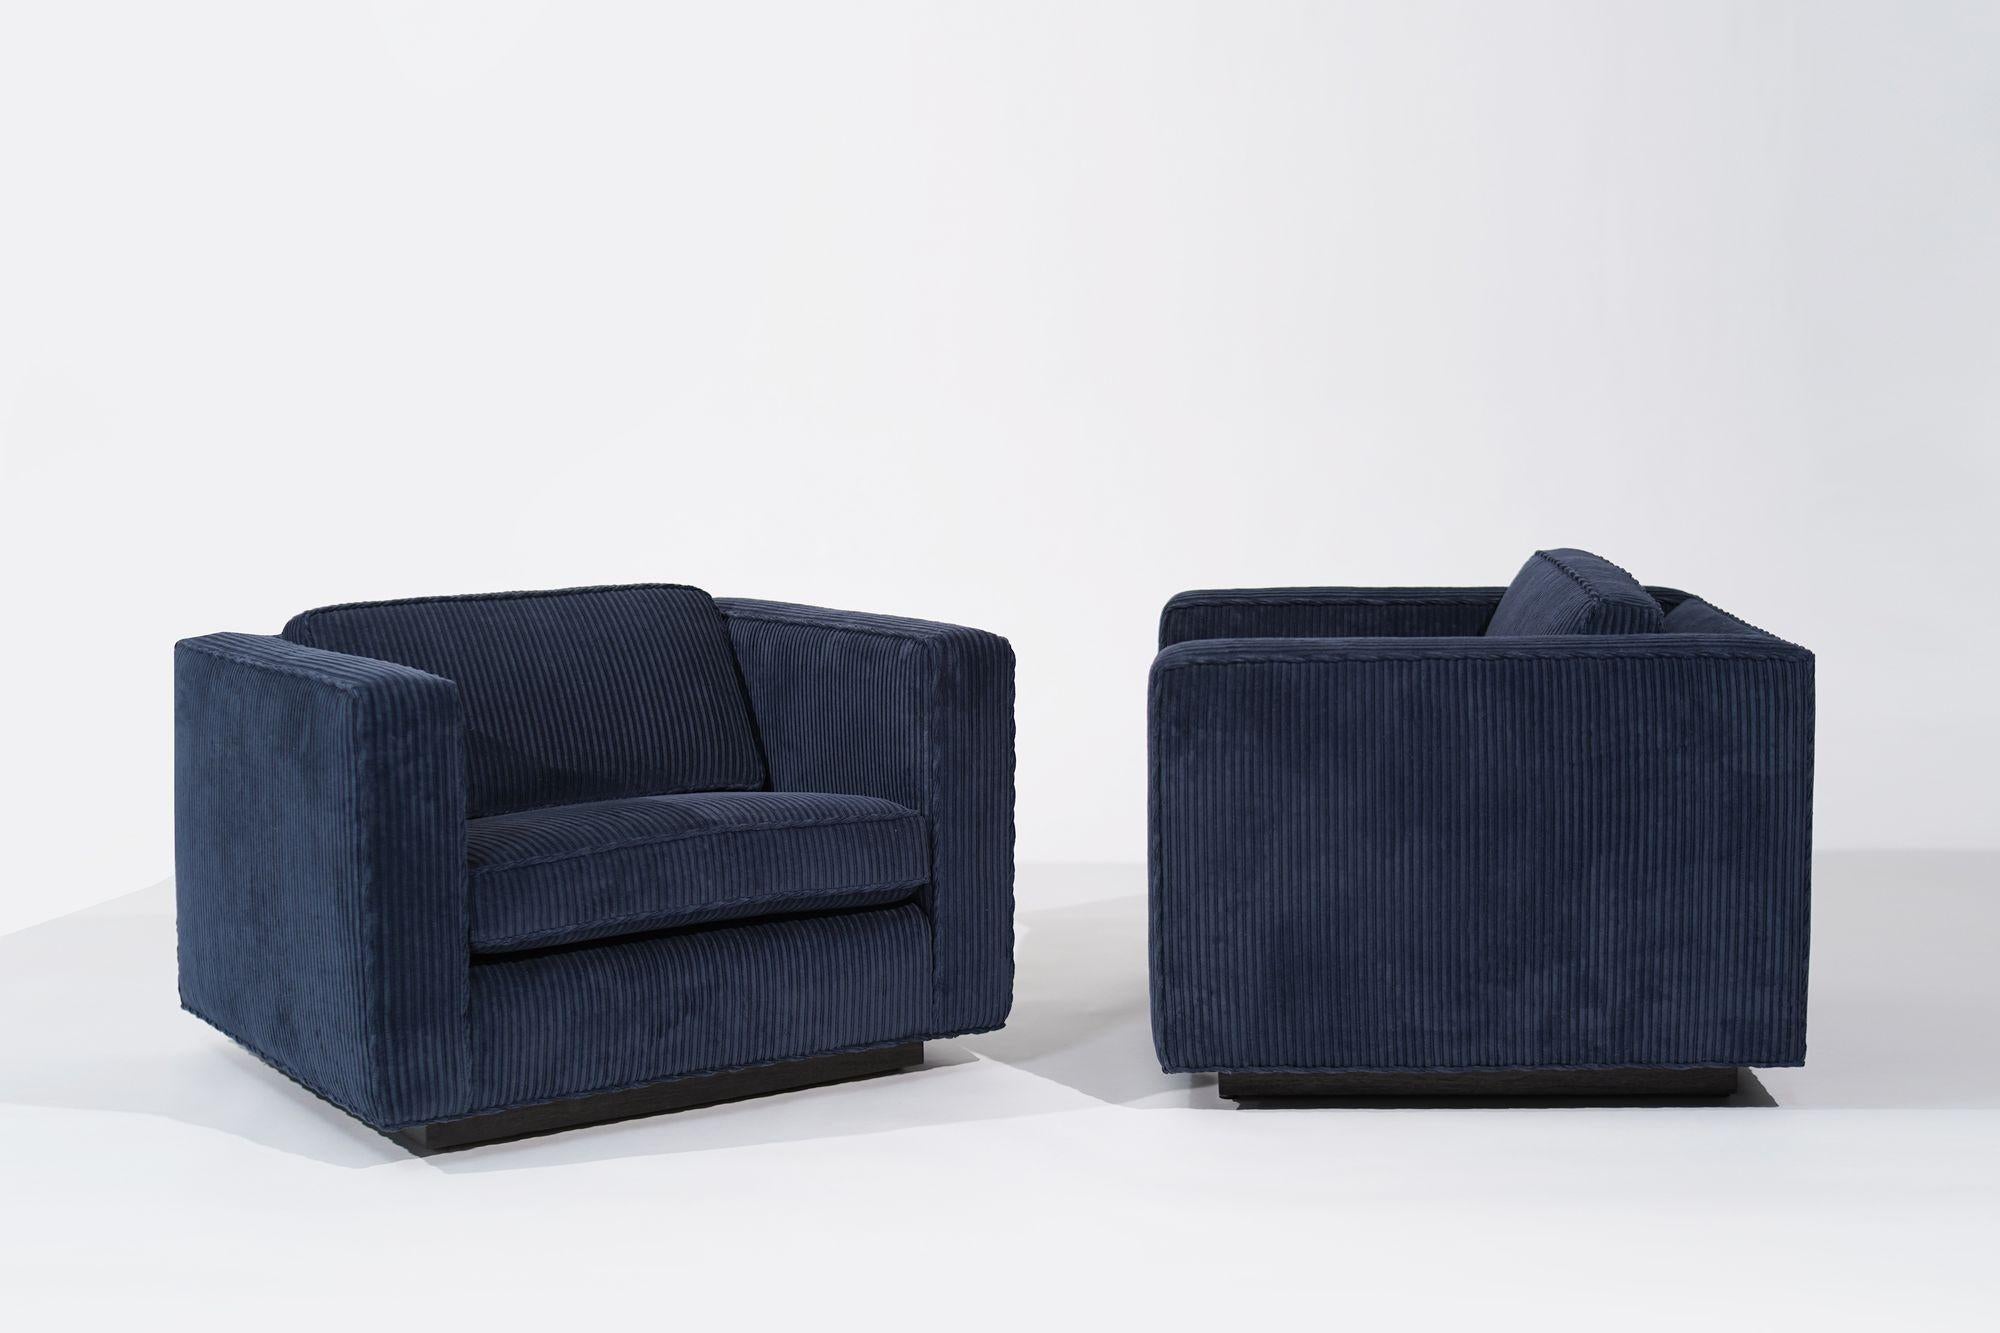 Fully restored Low Profile Lounges by Milo Baughman, circa 1970s. This iconic pair has been meticulously revitalized and reupholstered in a luxurious navy blue corduroy fabric by Holly Hunt, seamlessly blending mid-century charm with modern comfort.